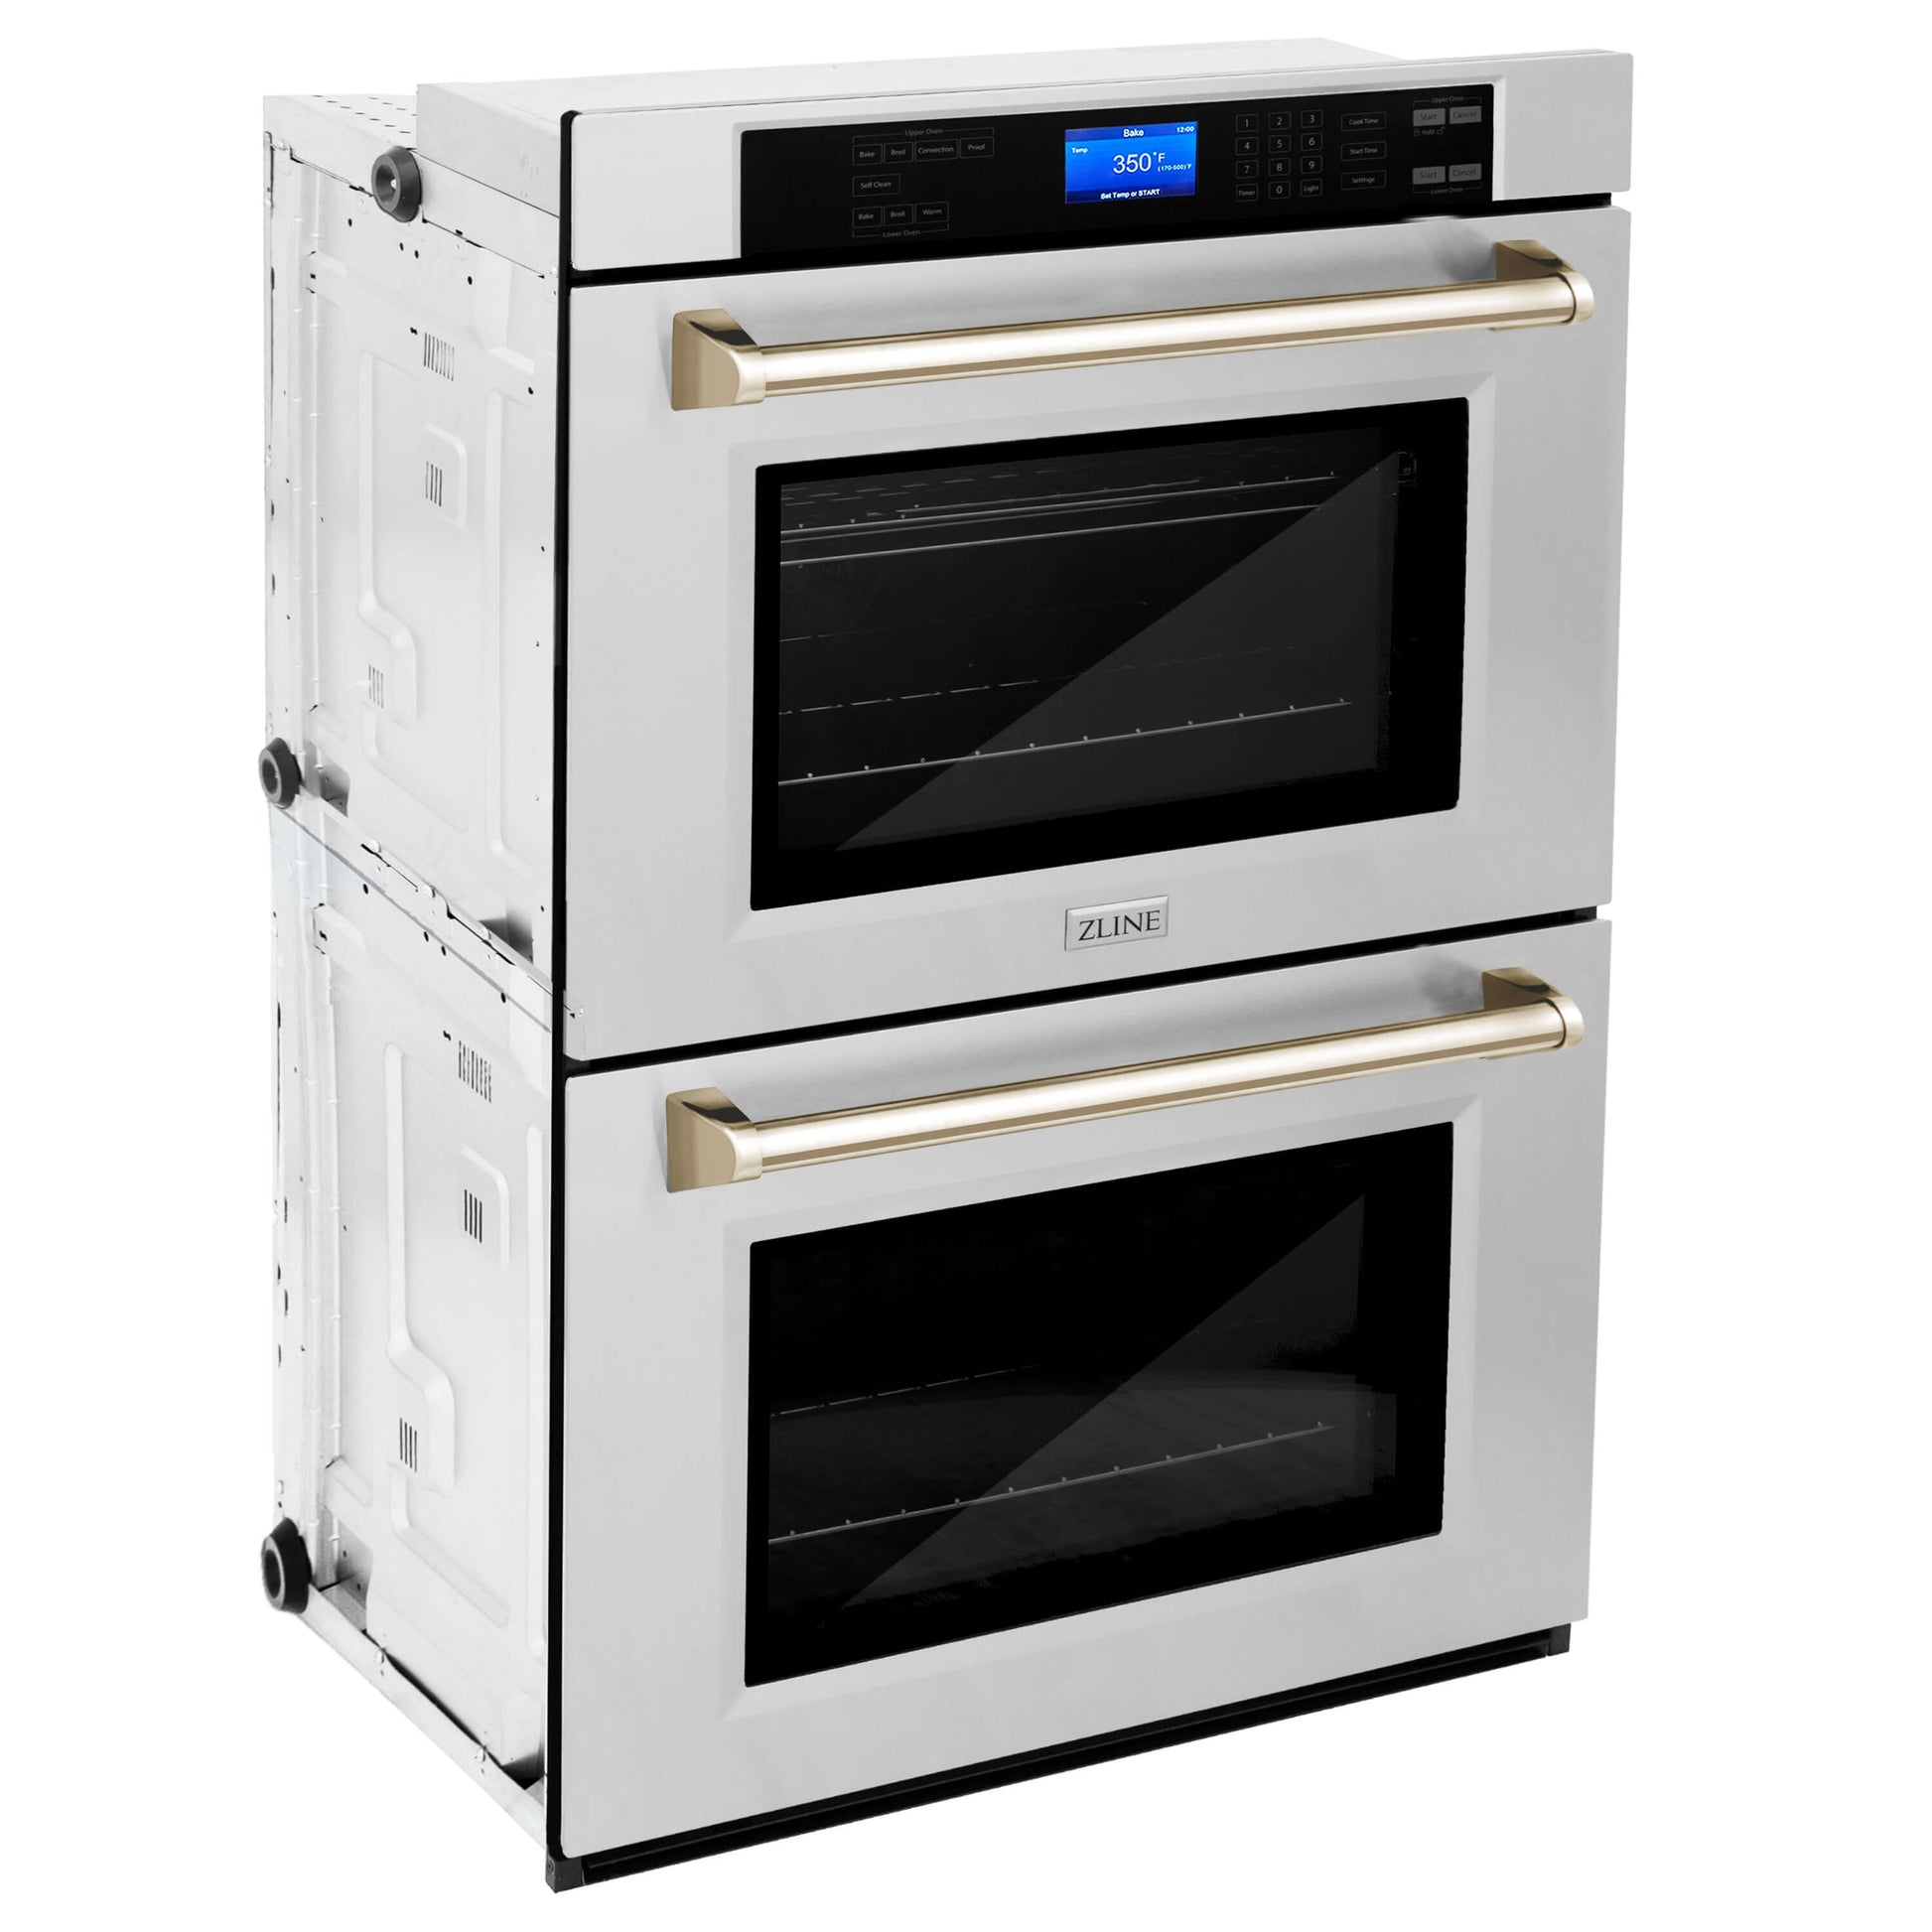 ZLINE Autograph Edition 30 in. Electric Double Wall Oven with Self Clean and True Convection in Stainless Steel and Polished Gold Accents (AWDZ-30-G) side, closed.